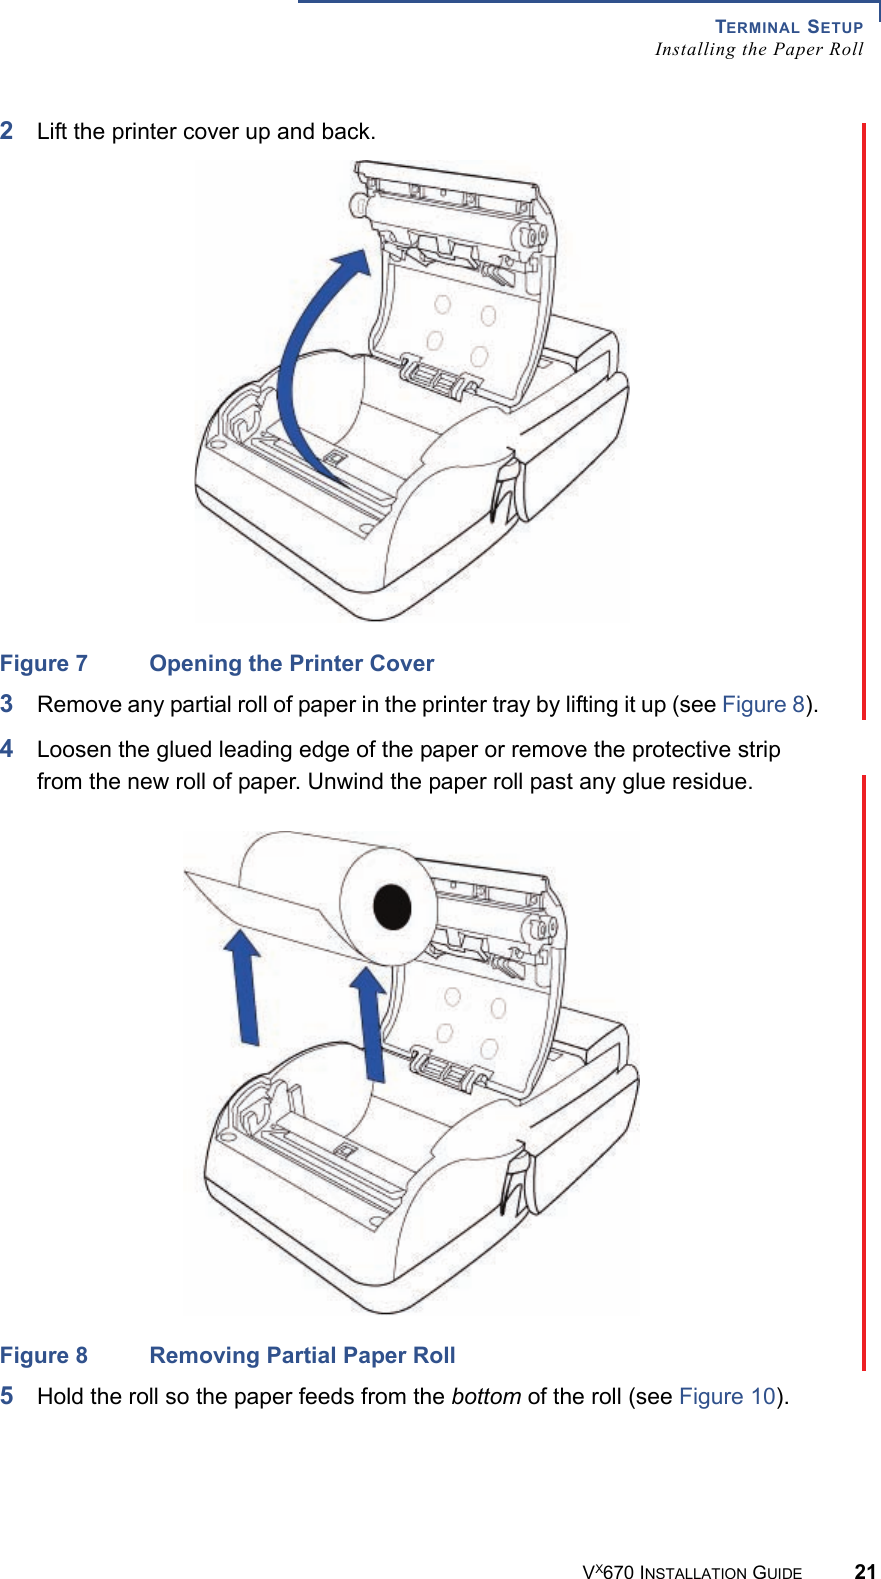 TERMINAL SETUPInstalling the Paper RollVX670 INSTALLATION GUIDE 212Lift the printer cover up and back. Figure 7 Opening the Printer Cover3Remove any partial roll of paper in the printer tray by lifting it up (see Figure 8). 4Loosen the glued leading edge of the paper or remove the protective strip from the new roll of paper. Unwind the paper roll past any glue residue.Figure 8 Removing Partial Paper Roll5Hold the roll so the paper feeds from the bottom of the roll (see Figure 10).